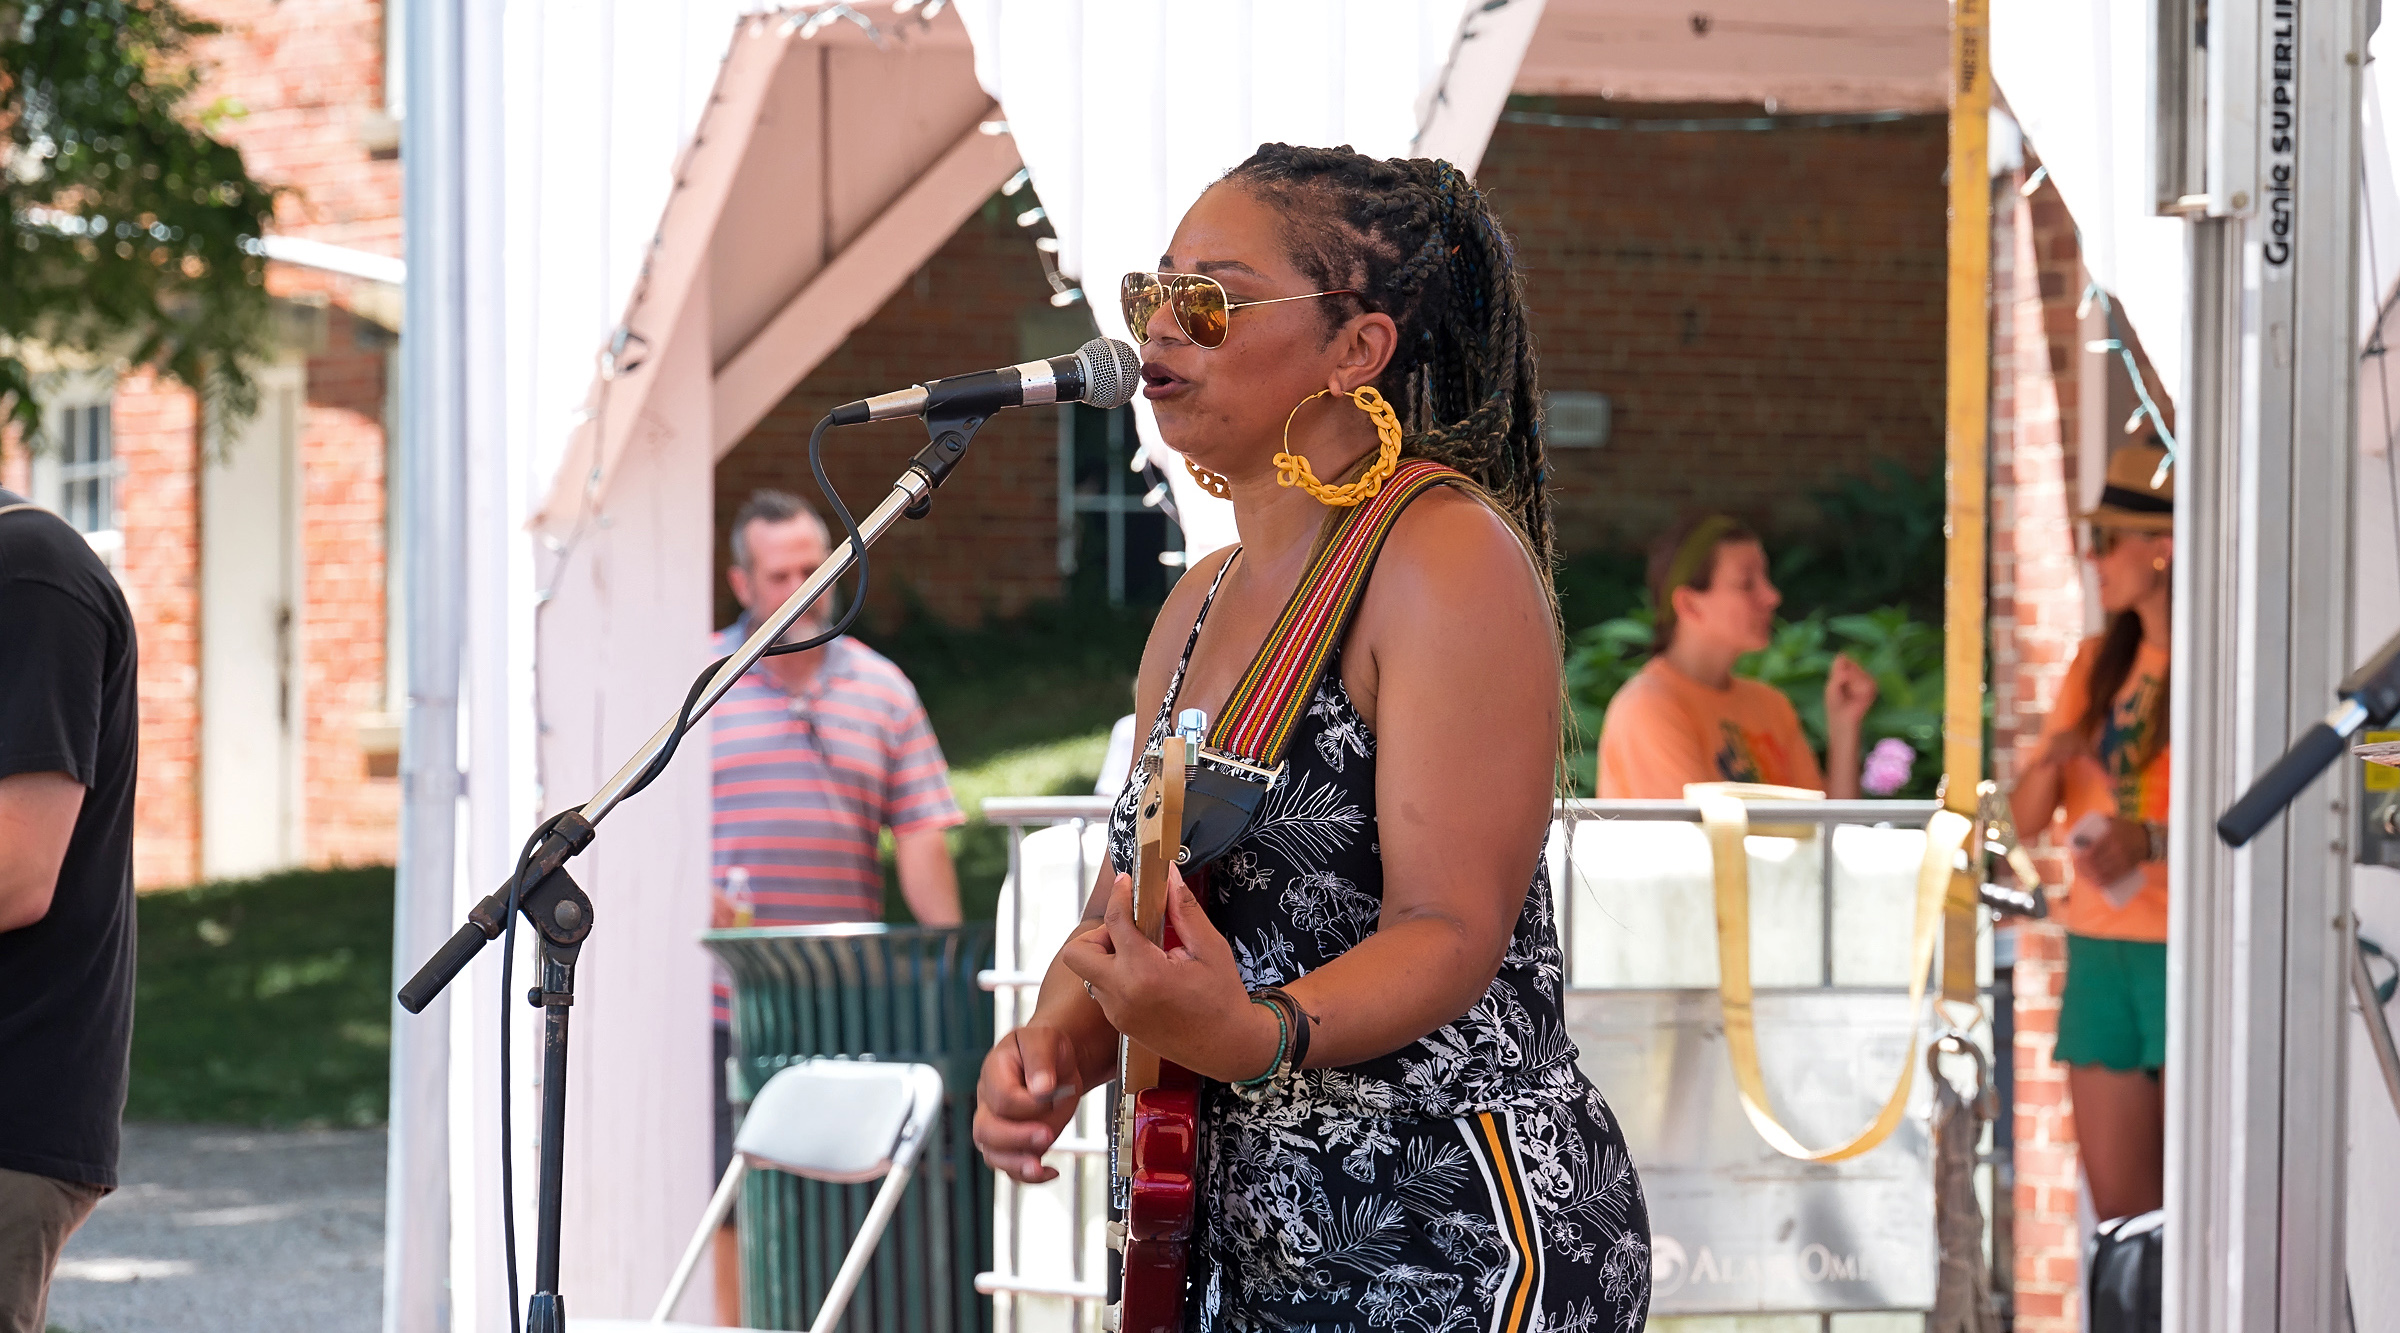 Live music at Westerville Music & Arts Festival